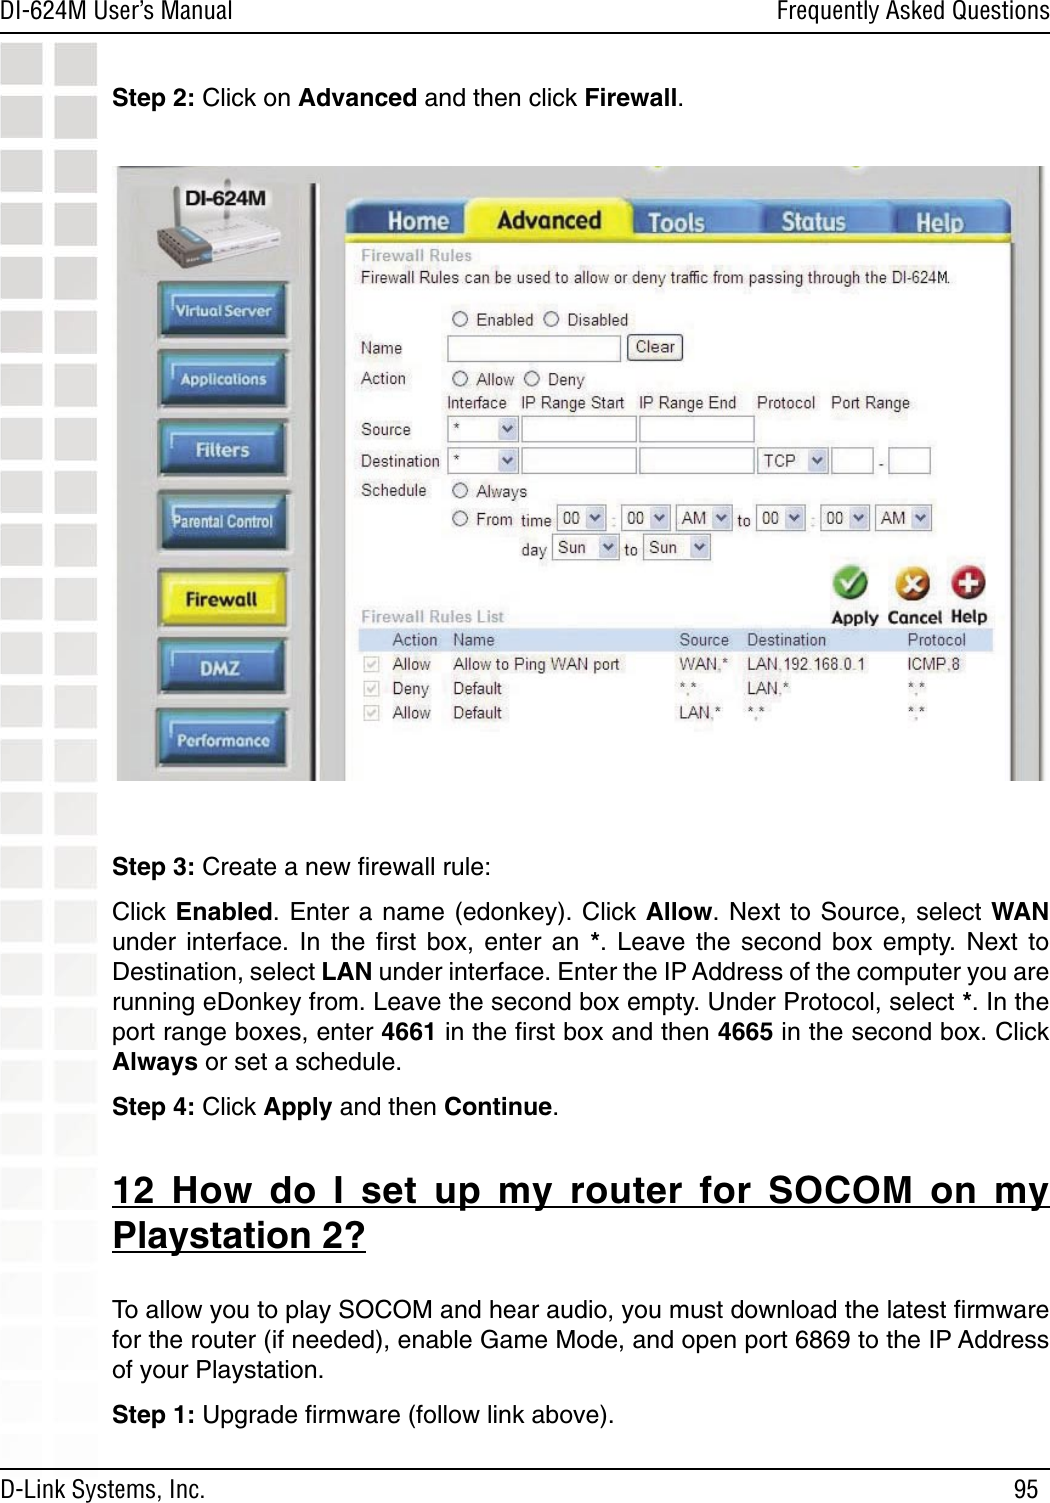 95DI-624M User’s Manual D-Link Systems, Inc.Frequently Asked QuestionsStep 2: Click on Advanced and then click Firewall. Step 3: Create a new ﬁrewall rule: Click Enabled. Enter a name (edonkey).  Click  Allow.  Next to Source, select WAN under  interface.  In  the  ﬁrst  box,  enter  an  *.  Leave  the  second  box  empty.  Next  to Destination, select LAN under interface. Enter the IP Address of the computer you are running eDonkey from. Leave the second box empty. Under Protocol, select *. In the port range boxes, enter 4661 in the ﬁrst box and then 4665 in the second box. Click Always or set a schedule. Step 4: Click Apply and then Continue. 12  How  do  I  set  up  my  router  for  SOCOM  on  my Playstation 2?To allow you to play SOCOM and hear audio, you must download the latest ﬁrmware for the router (if needed), enable Game Mode, and open port 6869 to the IP Address of your Playstation.Step 1: Upgrade ﬁrmware (follow link above).